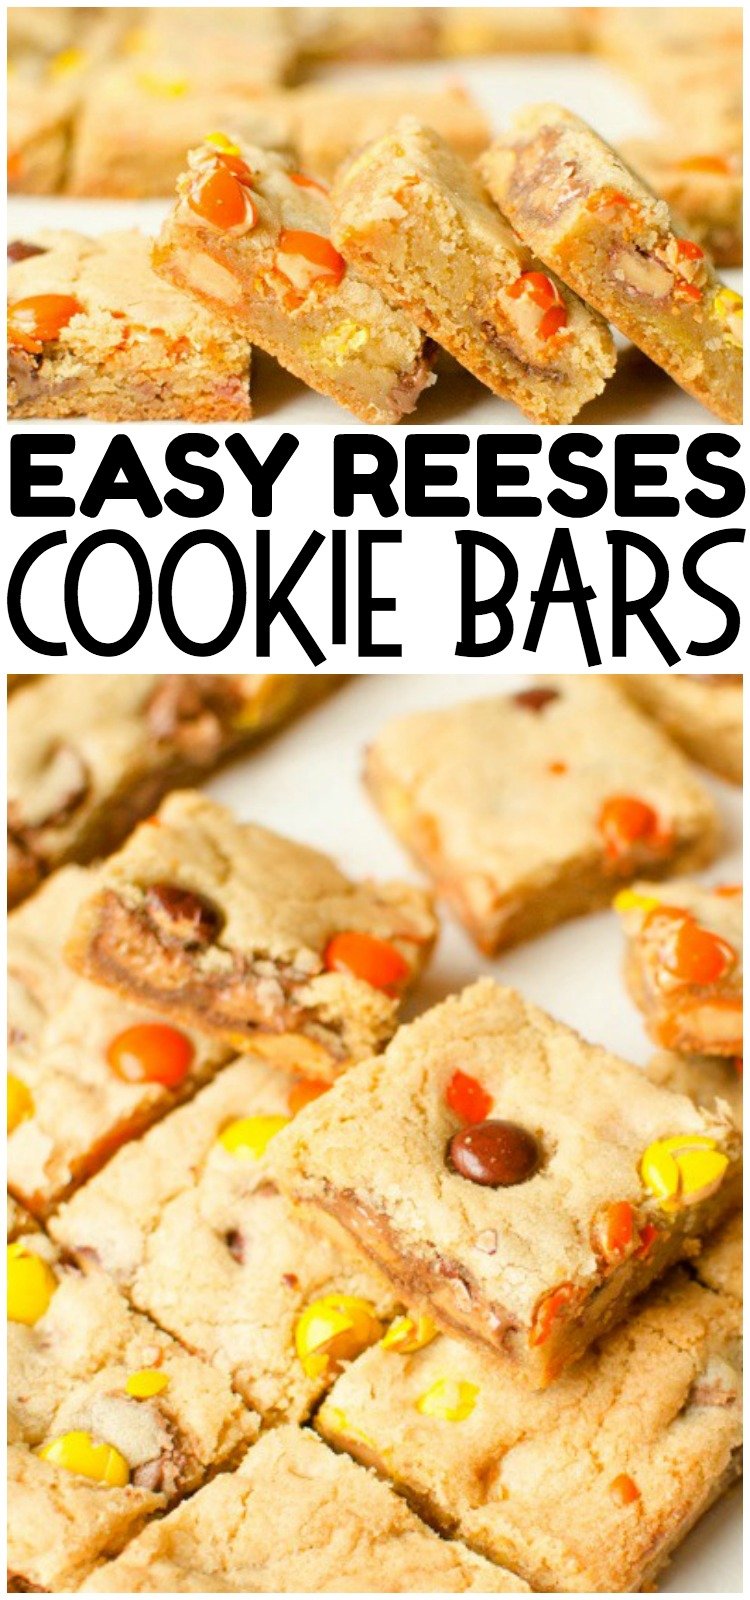 Reese's Cookie Bars are a thick, chewy & full of Reese's Pieces and Mini Reese's Cups! The rich, chewy cookie bar compliments the chocolate & peanut butter add in's perfectly. No rolling required, Cookie Bars are the way to go! #cookies #baking #reeses #chocolate #peanutbutter #cookies #recipe #dessert